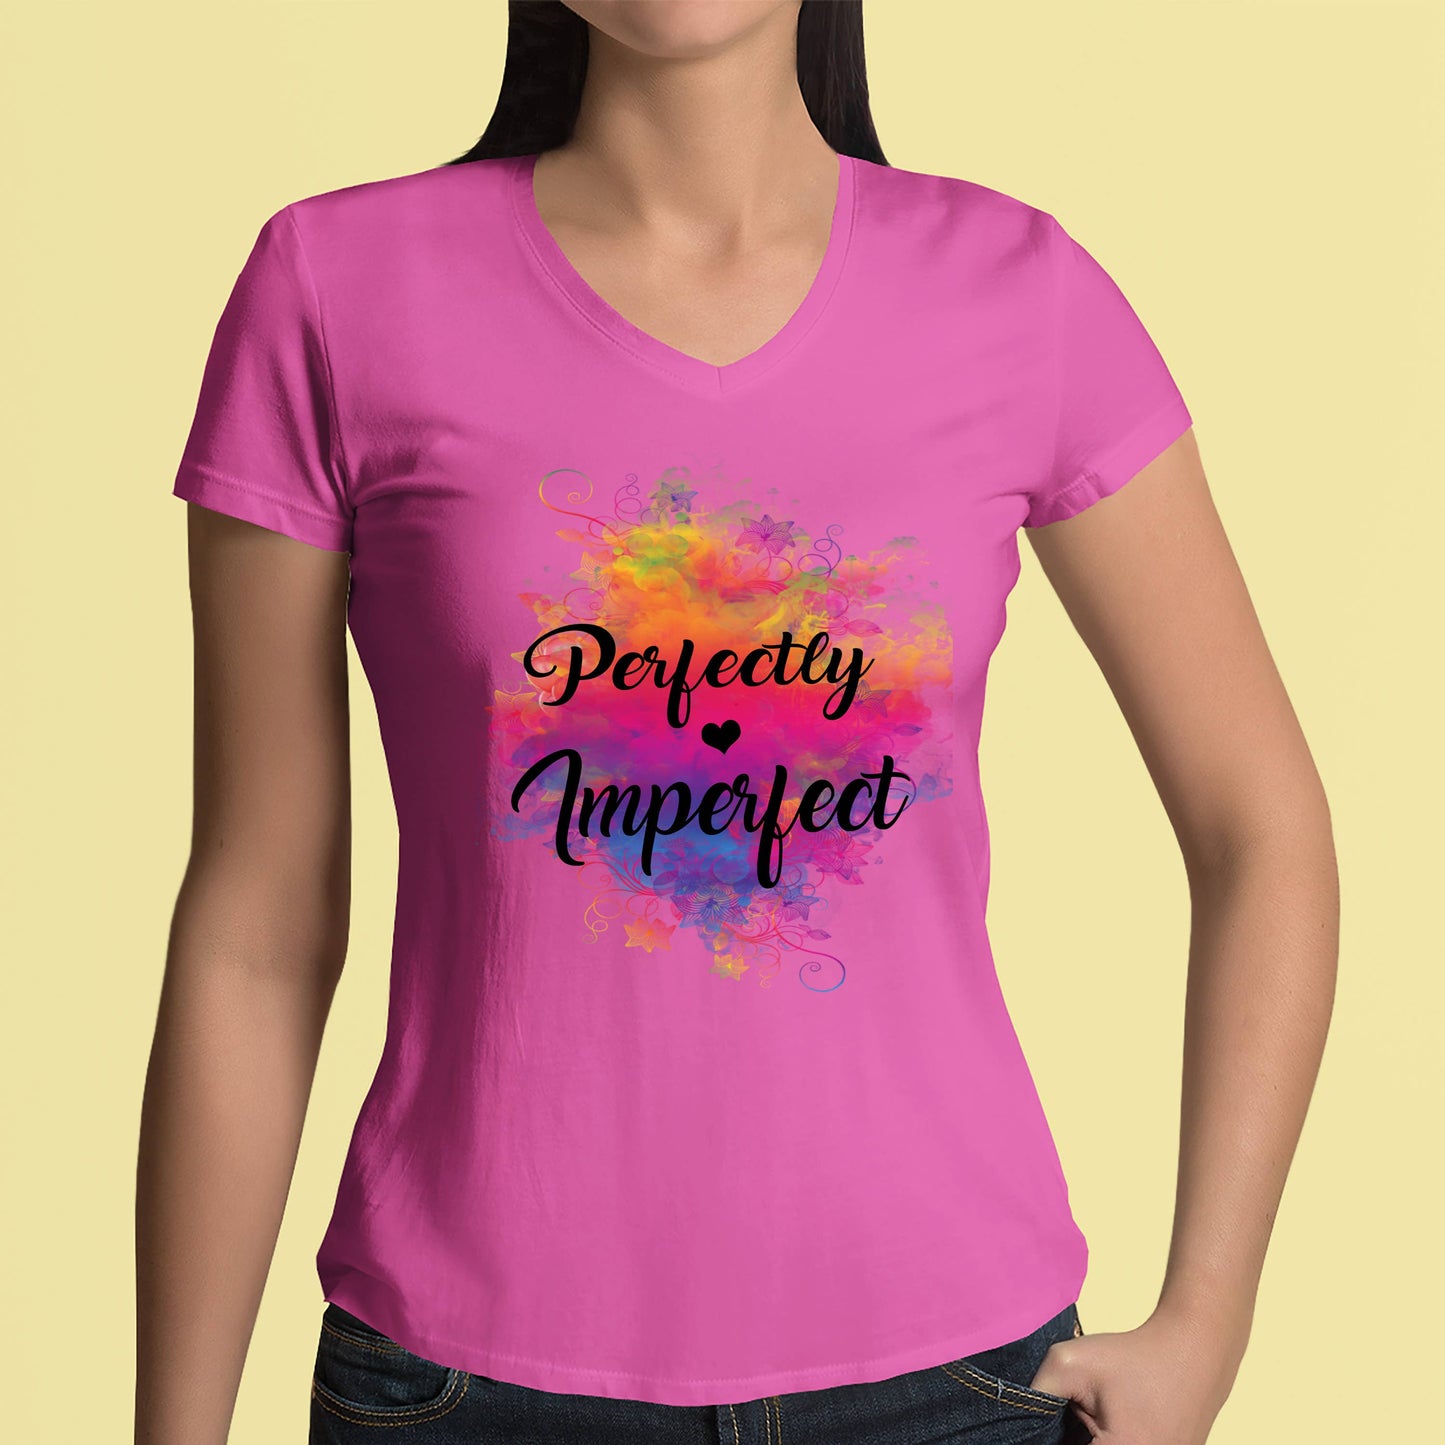 Perfect And Imperfect - Graphic Tee Shirt